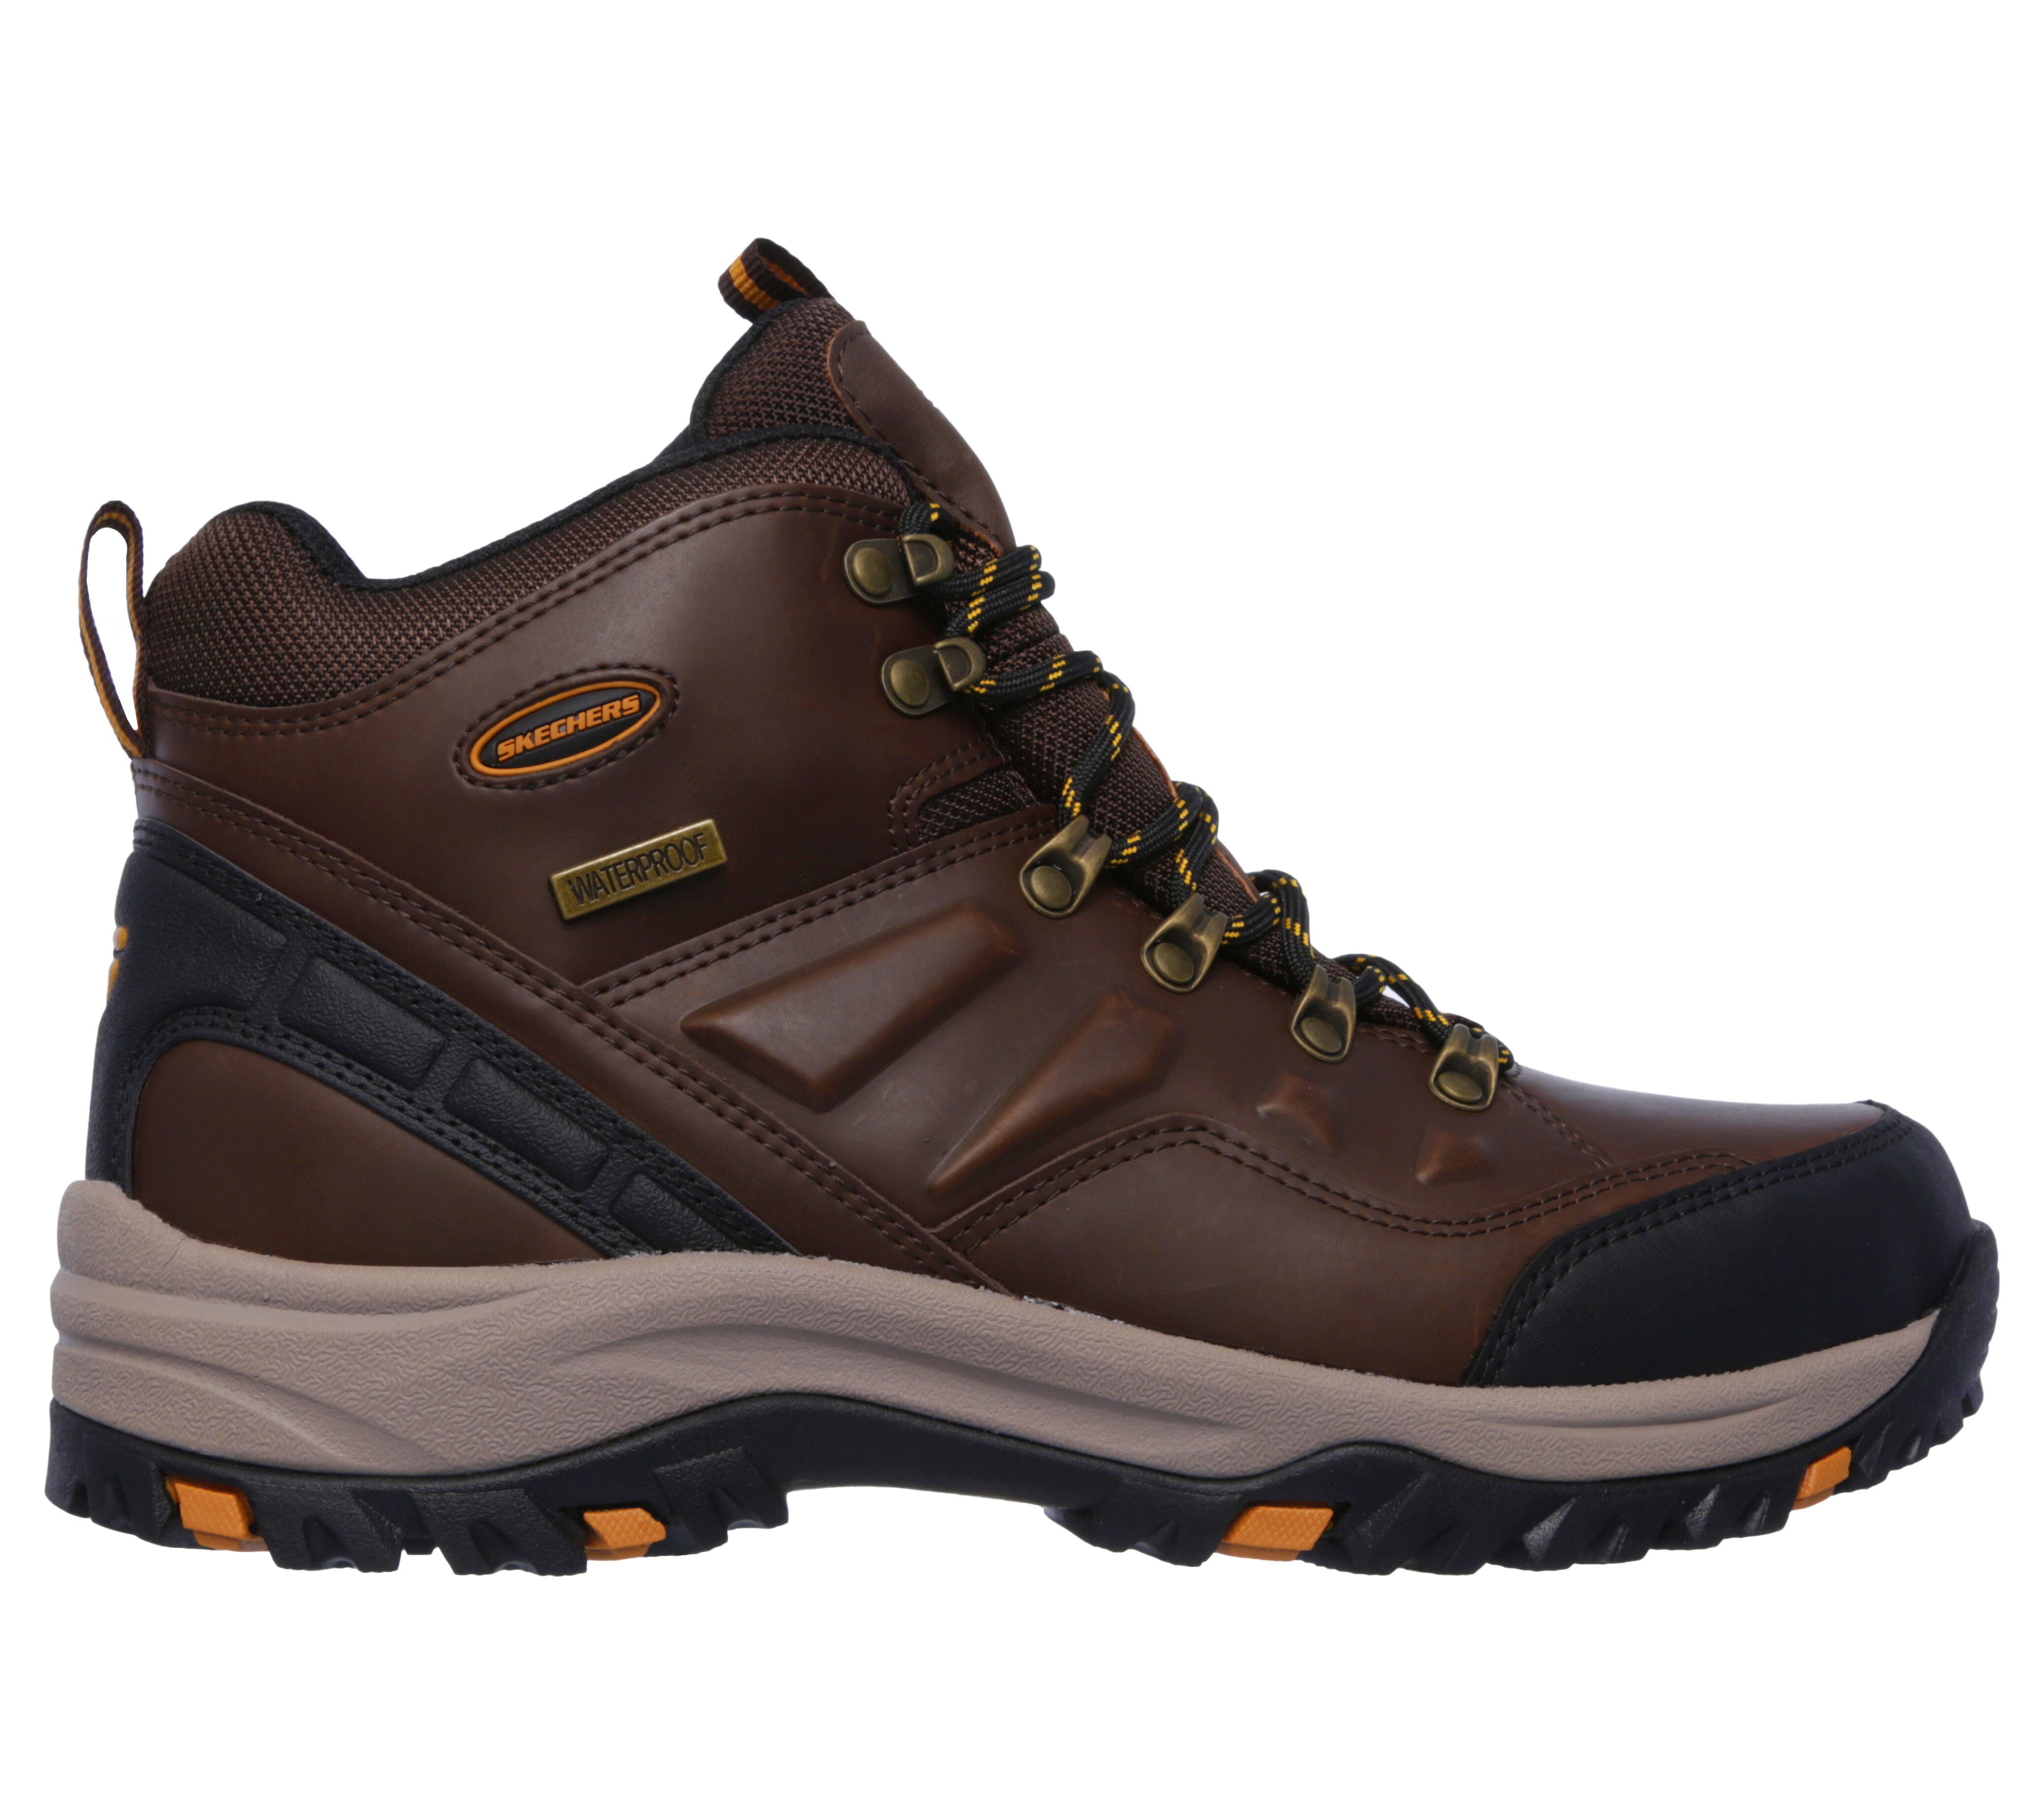 skechers mens boots for sale